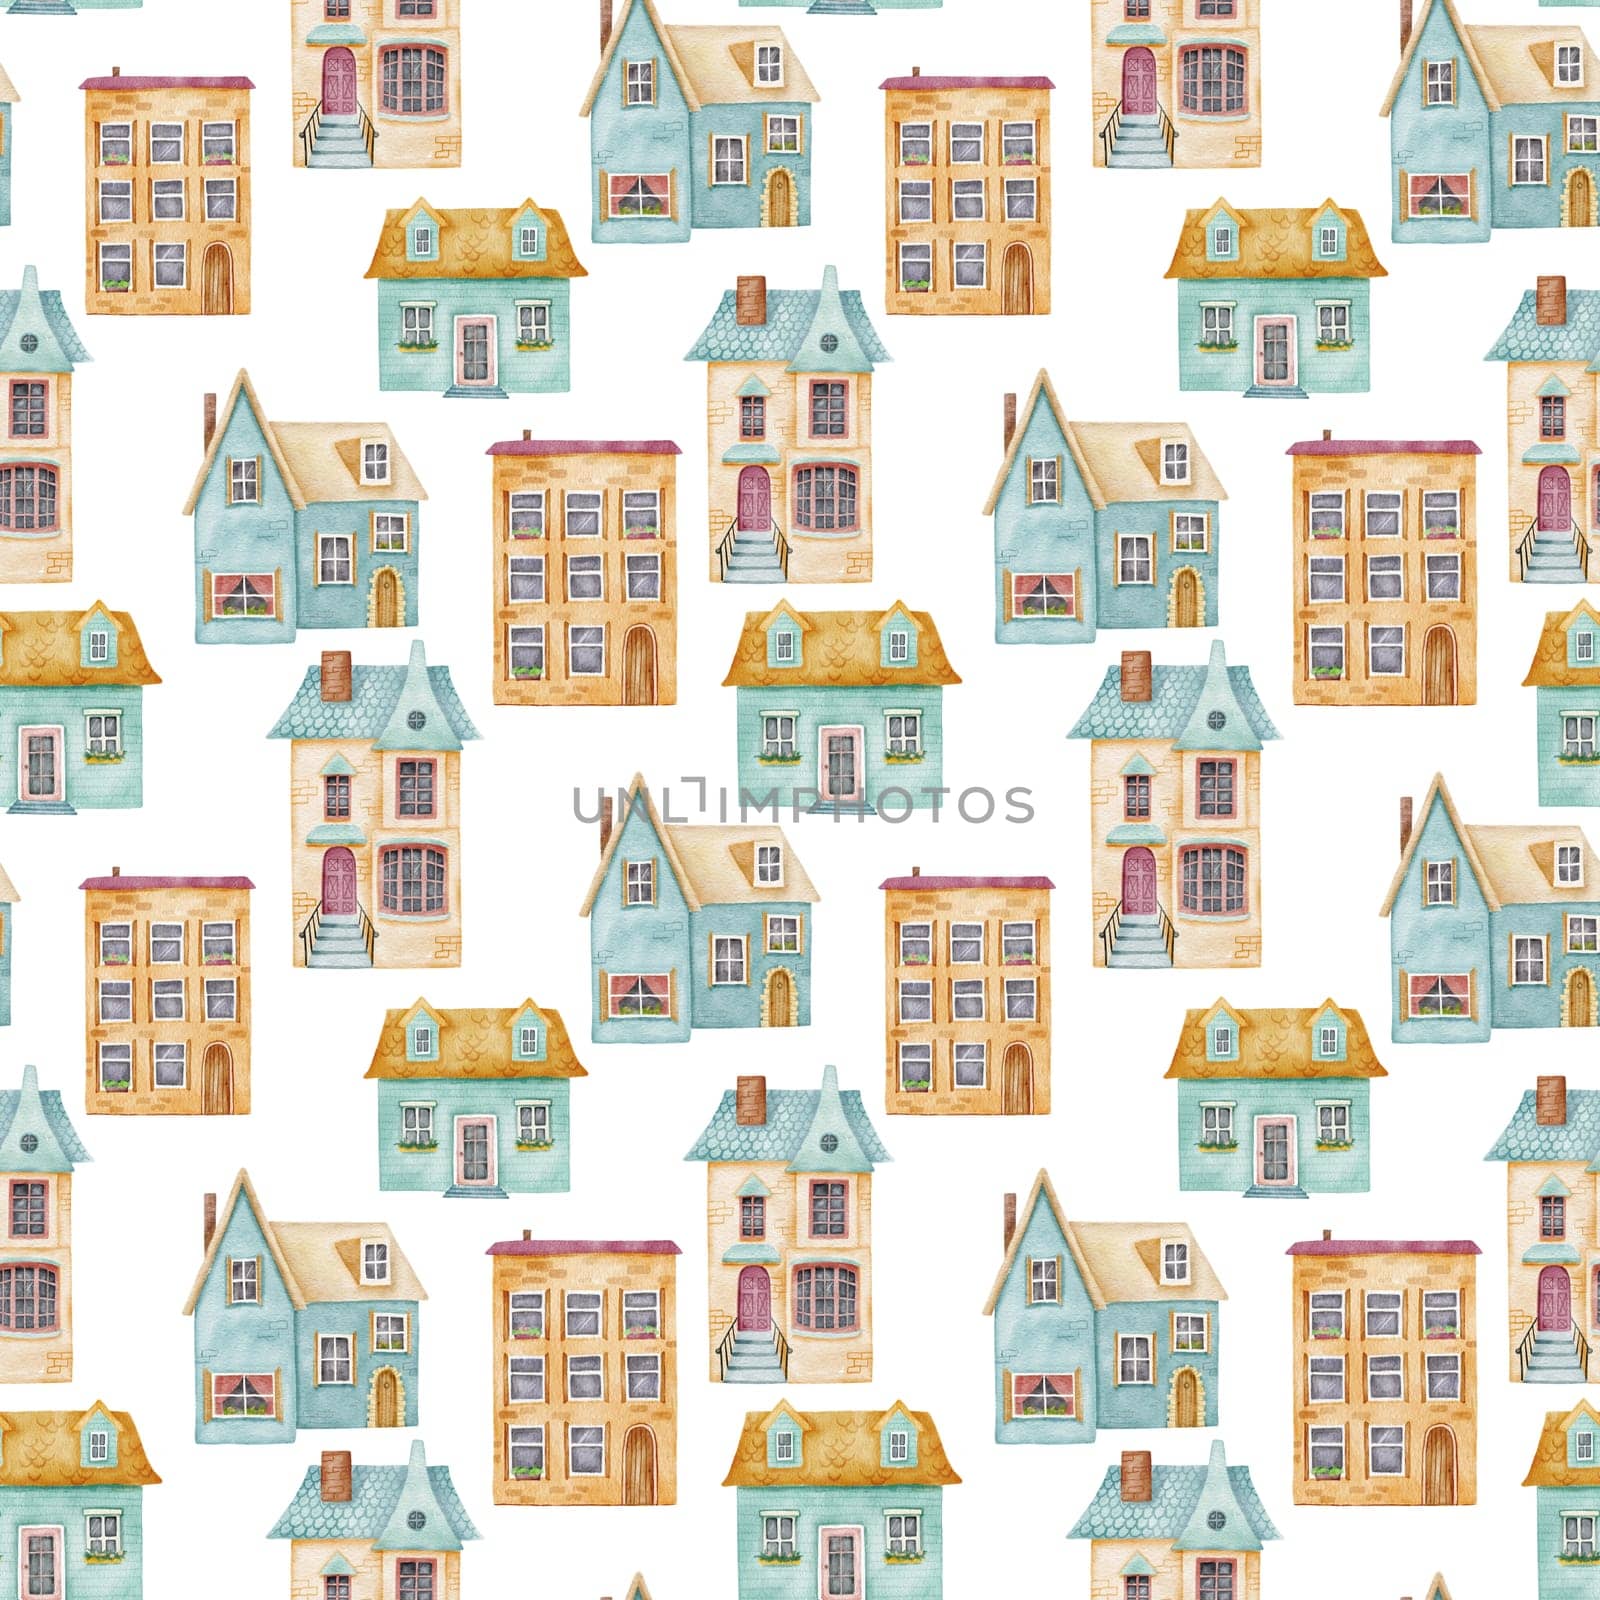 Seamless watercolor pattern with cute houses. Hand drawn blue old and cozy small buildings on white background.